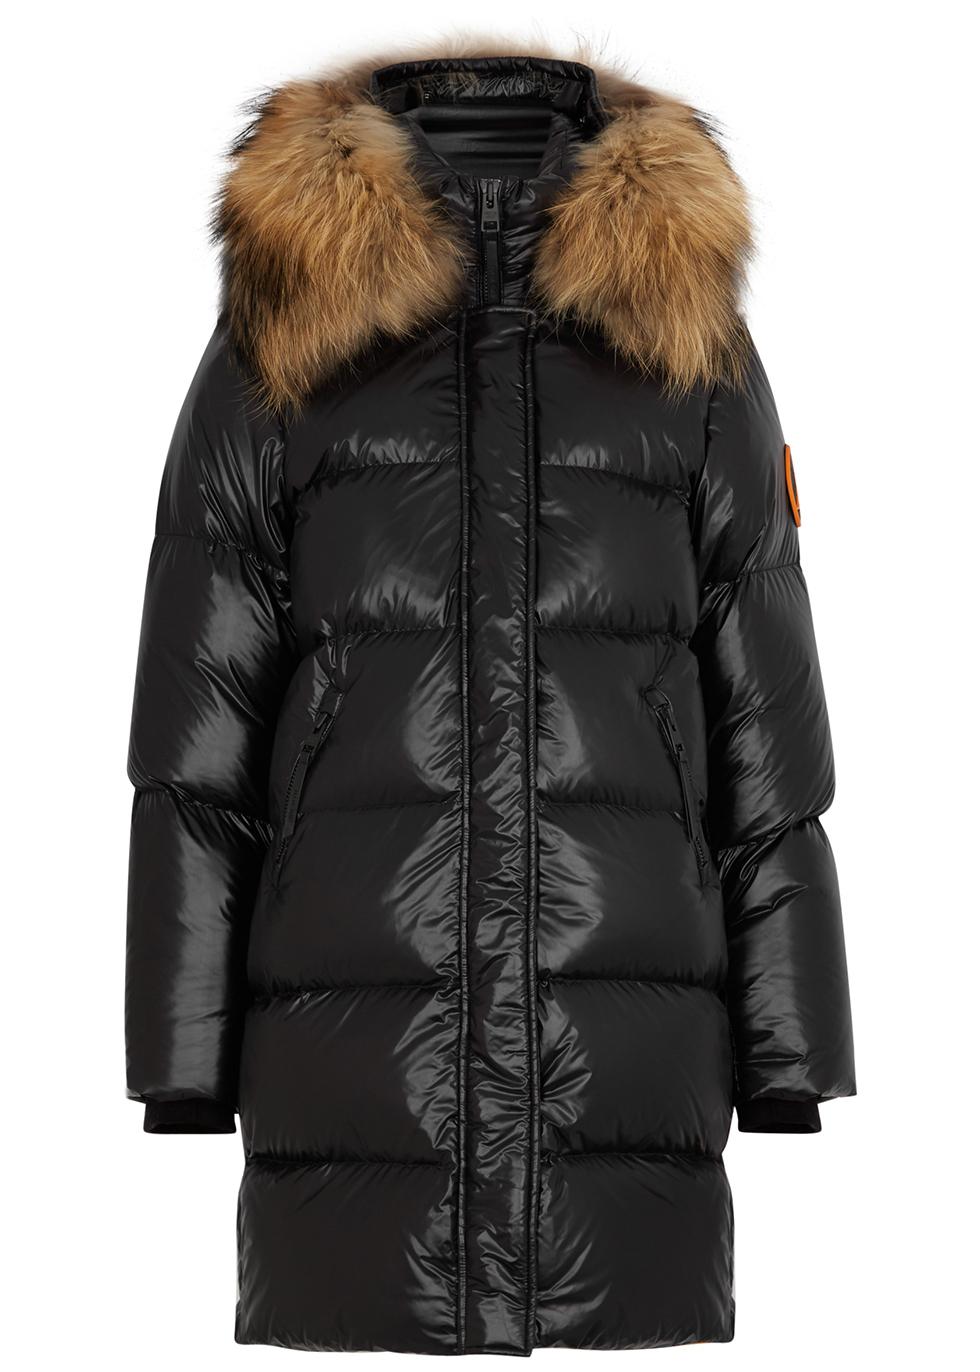 Black fur-trimmed quilted shell coat by ARCTIC ARMY